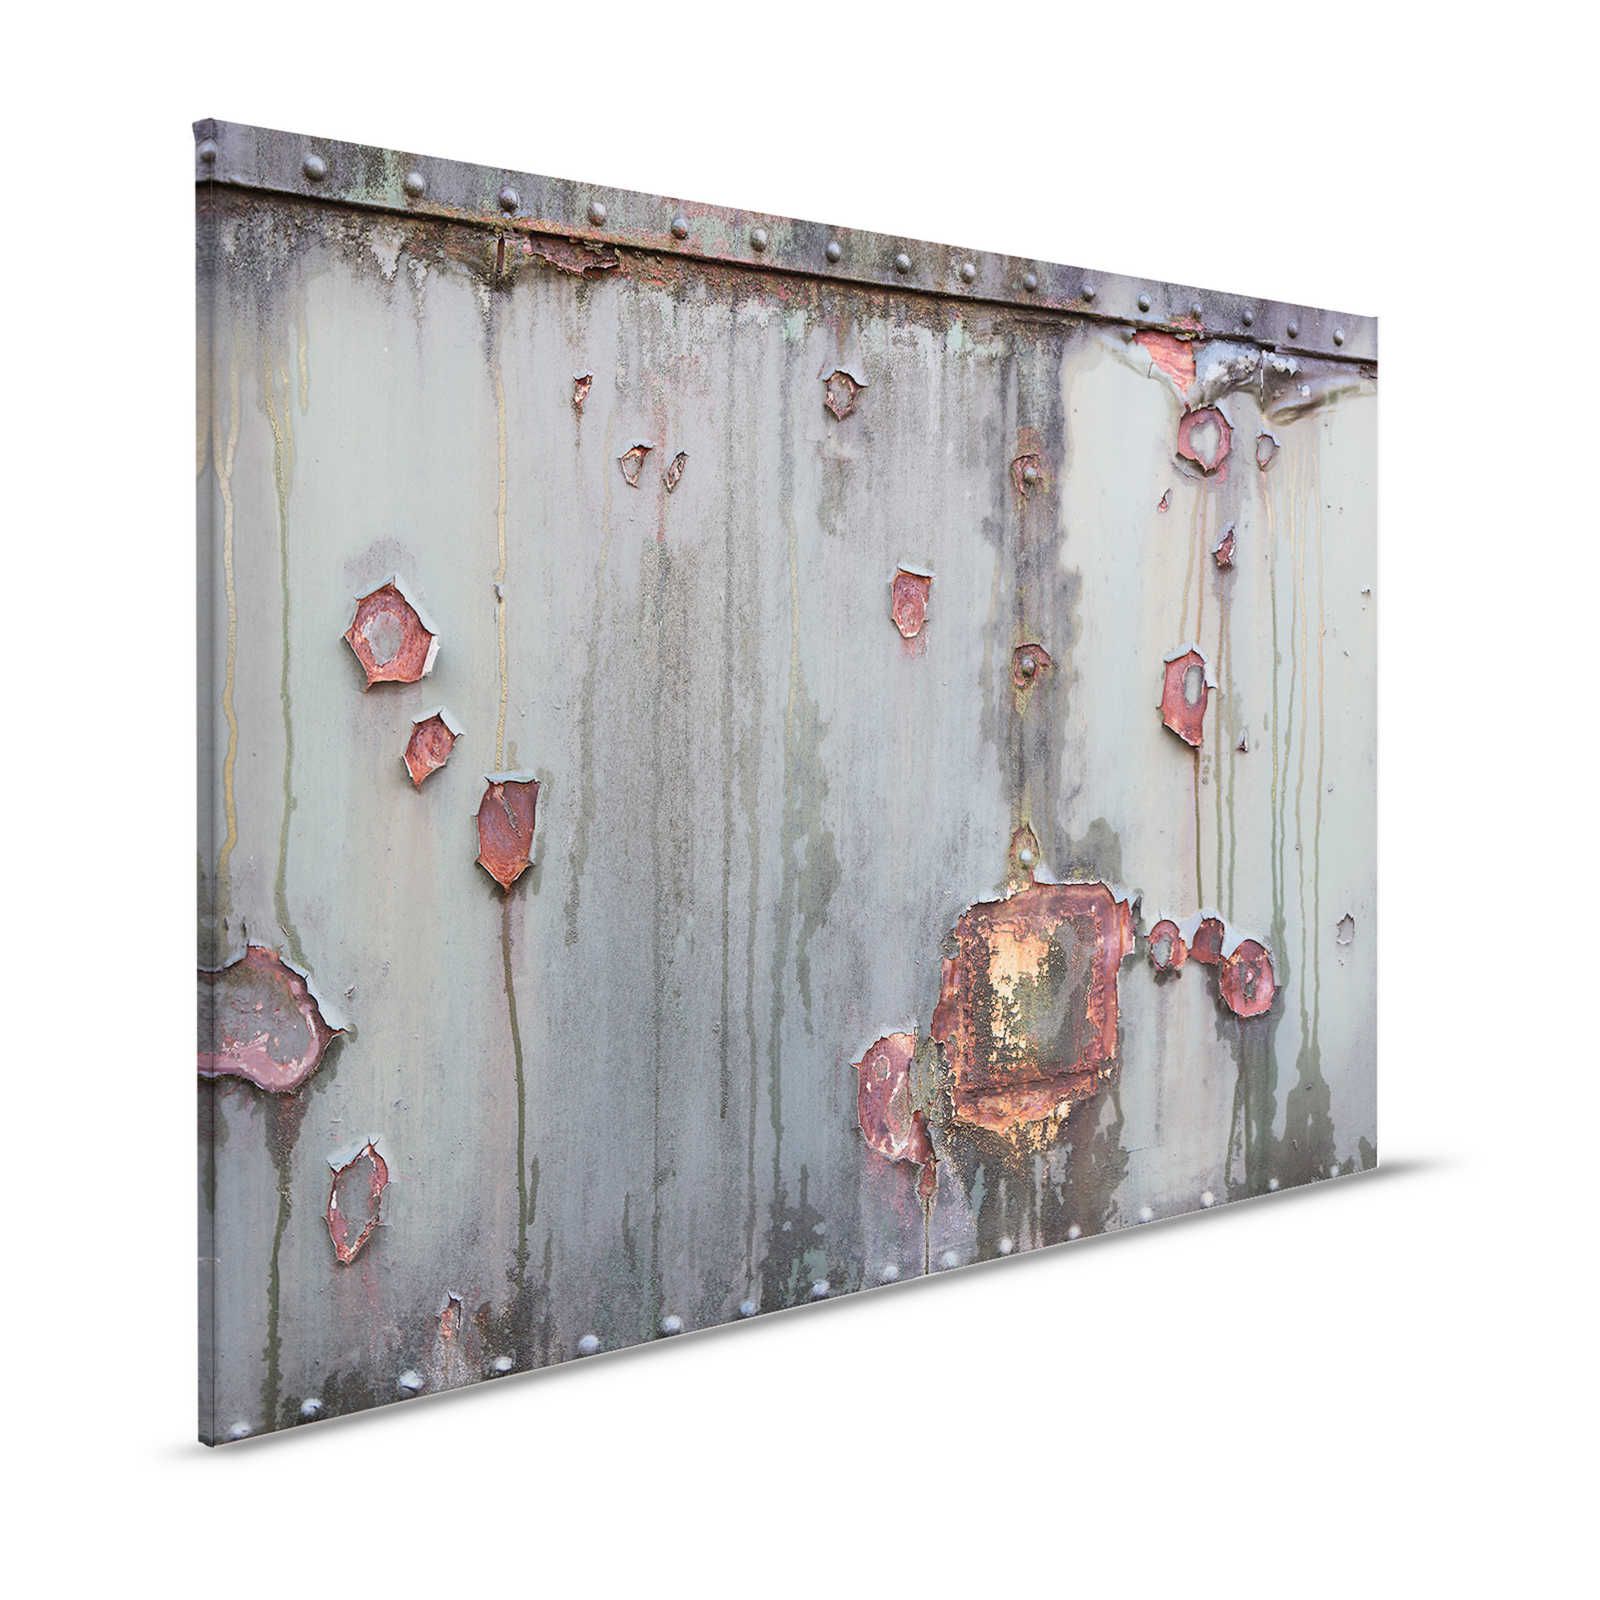 Metal Wall - Canvas painting Industrial with Rust & Used Look - 1.20 m x 0.80 m
